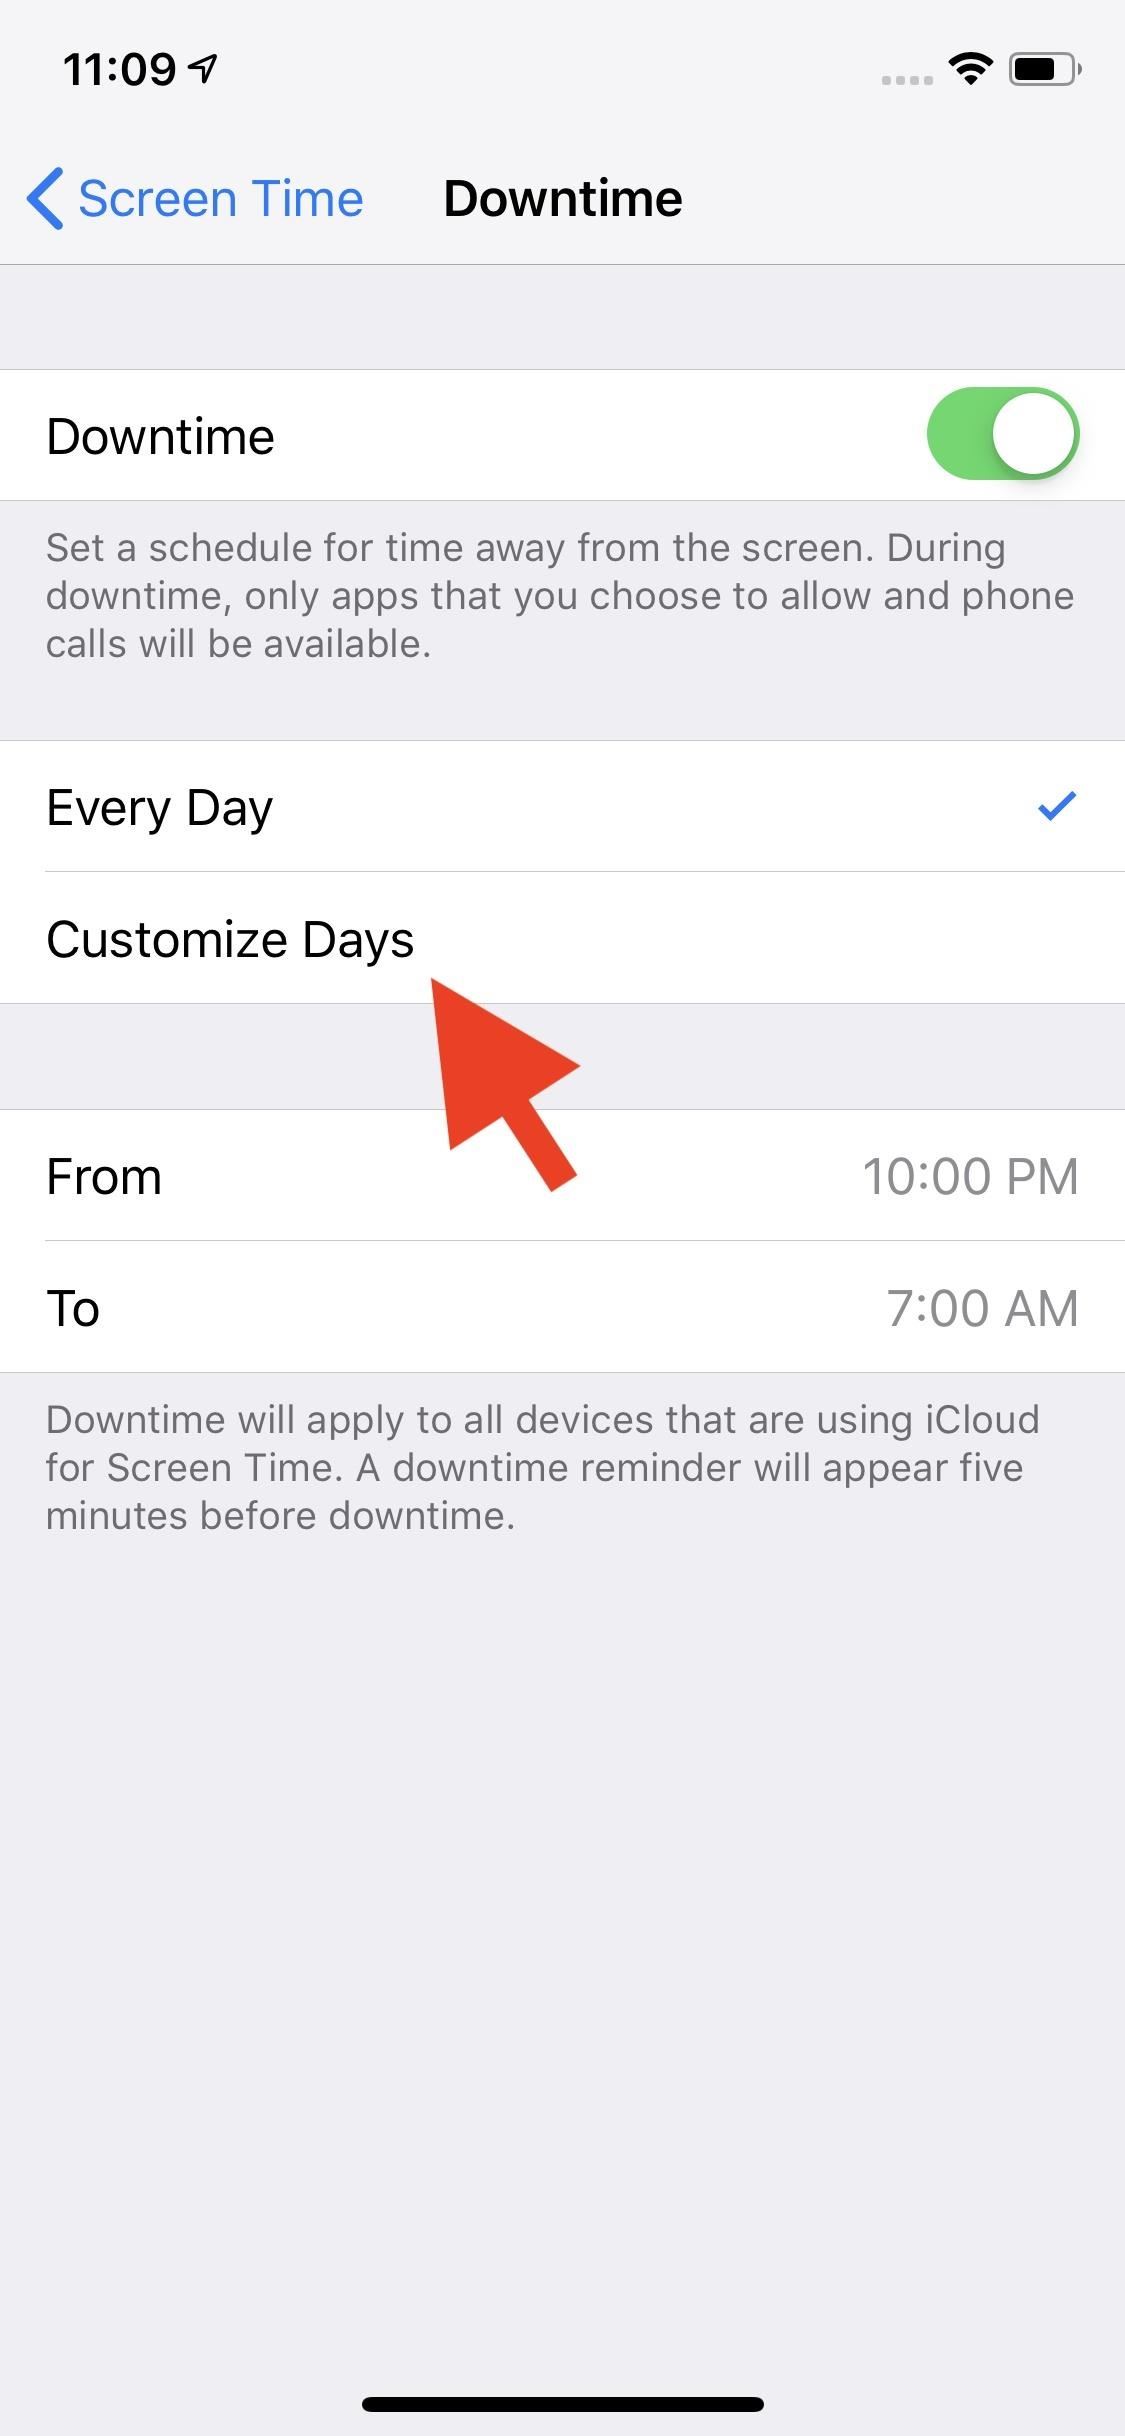 How to Set Different Downtime Schedules on Your iPhone for Each Day of the Week